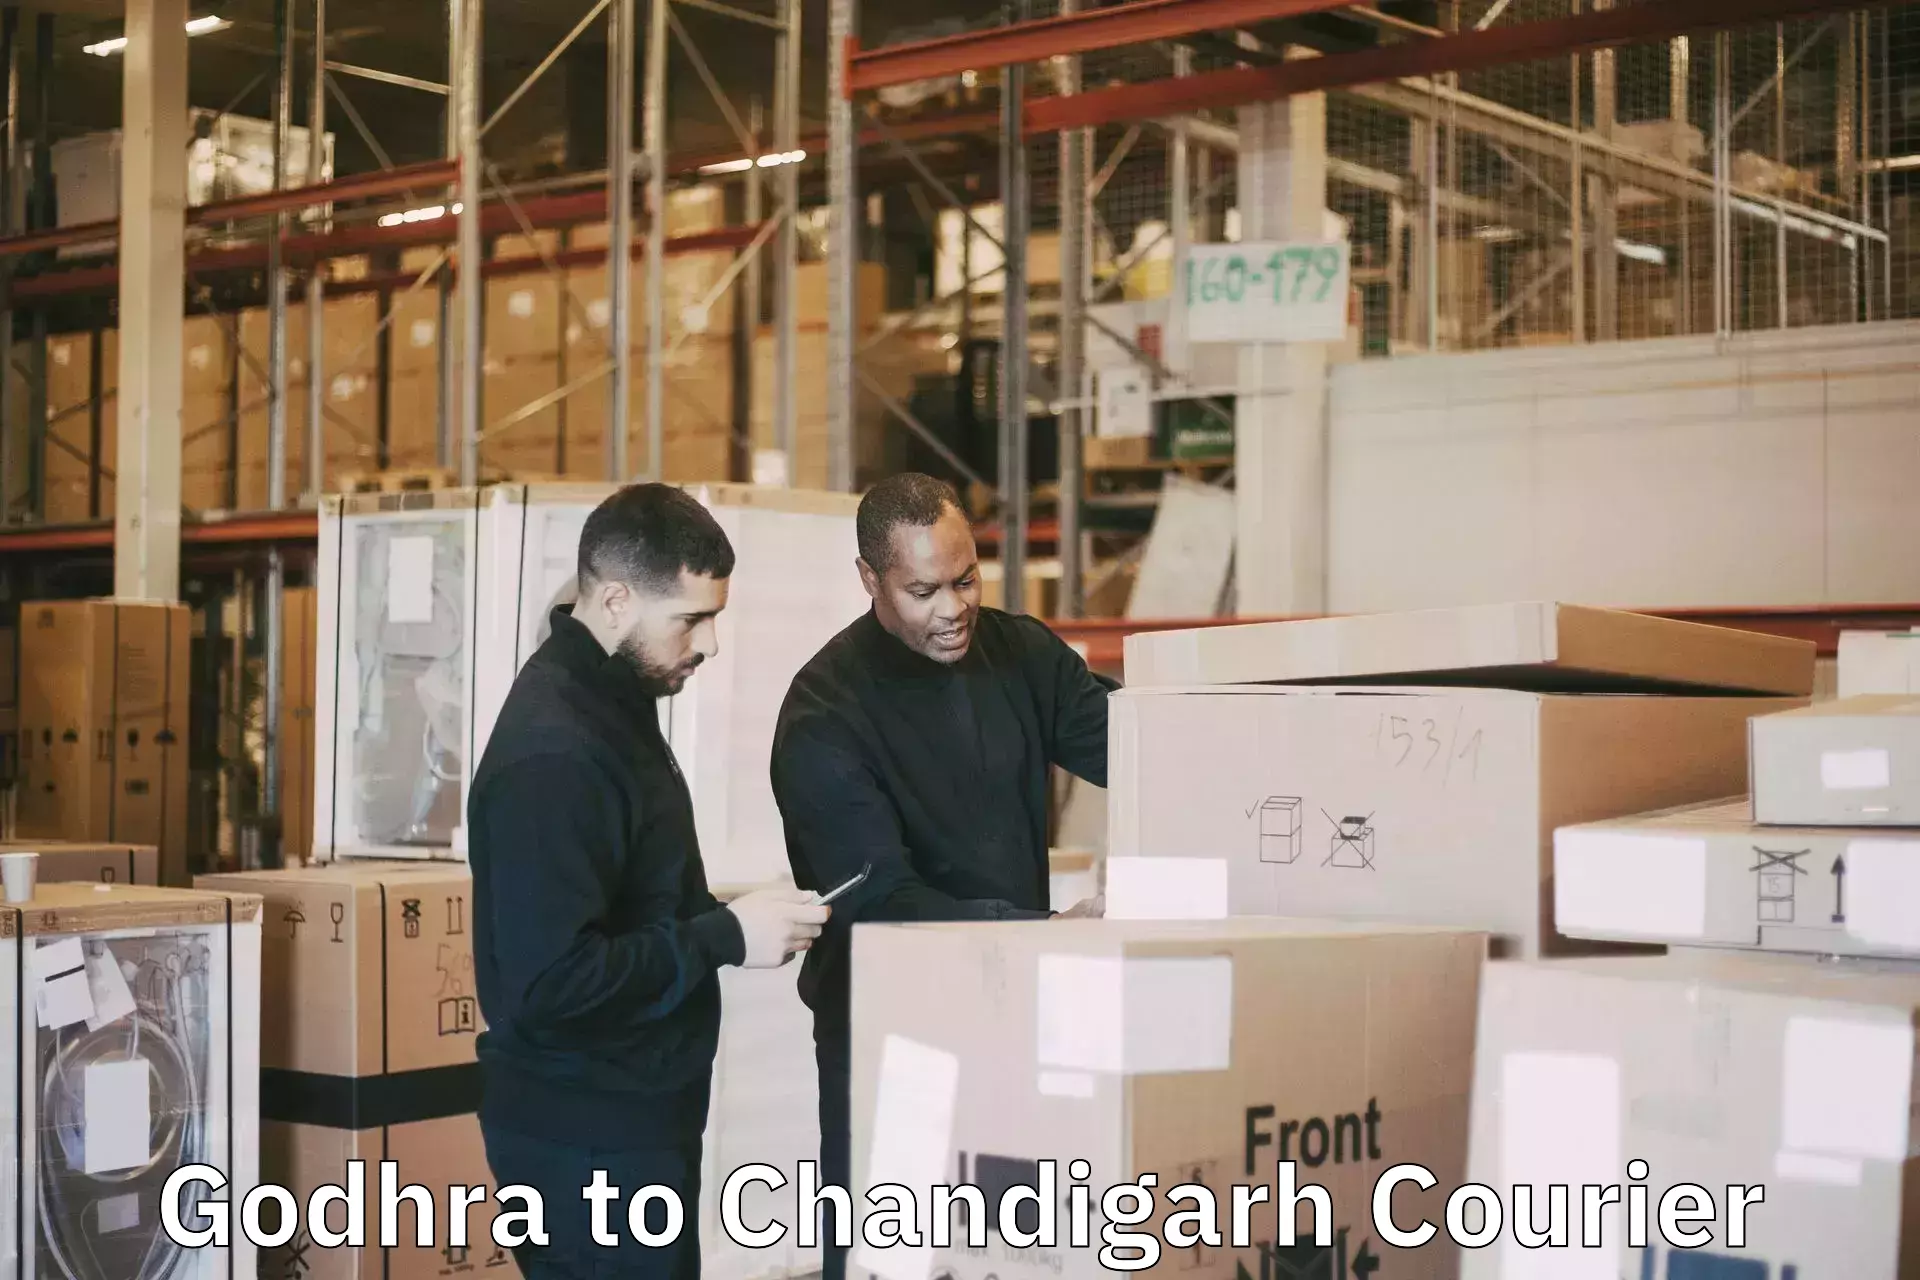 Luggage transport consultancy Godhra to Chandigarh